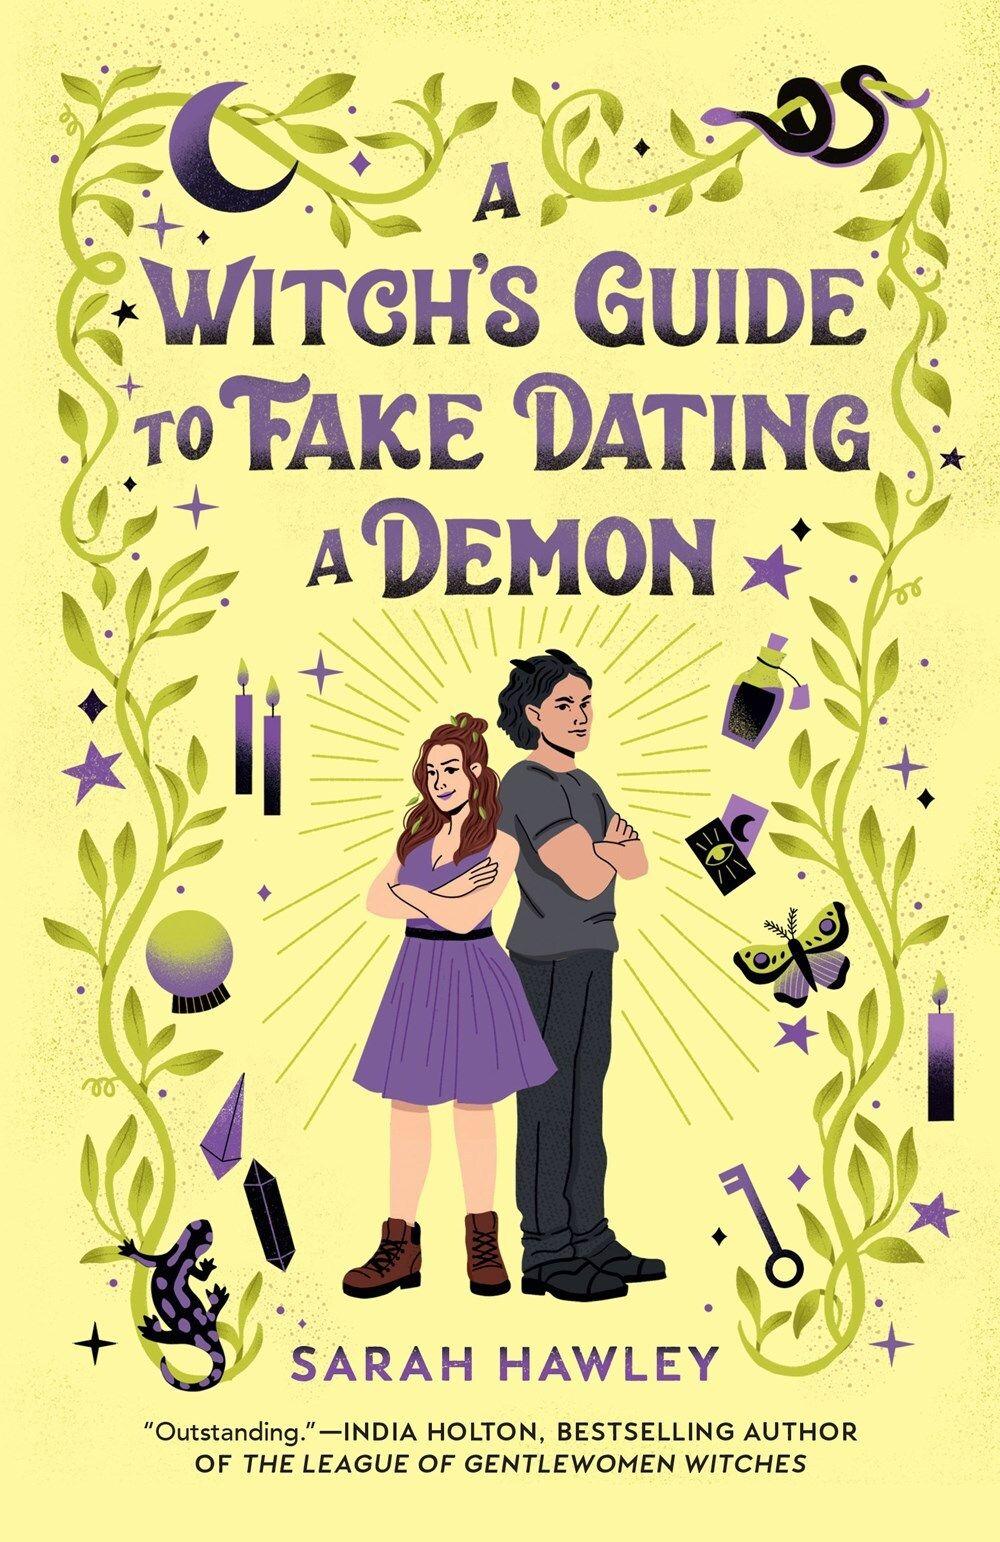 The cover of A Witch's Guide to Fake Dating a Demon by Sarah Hawley.